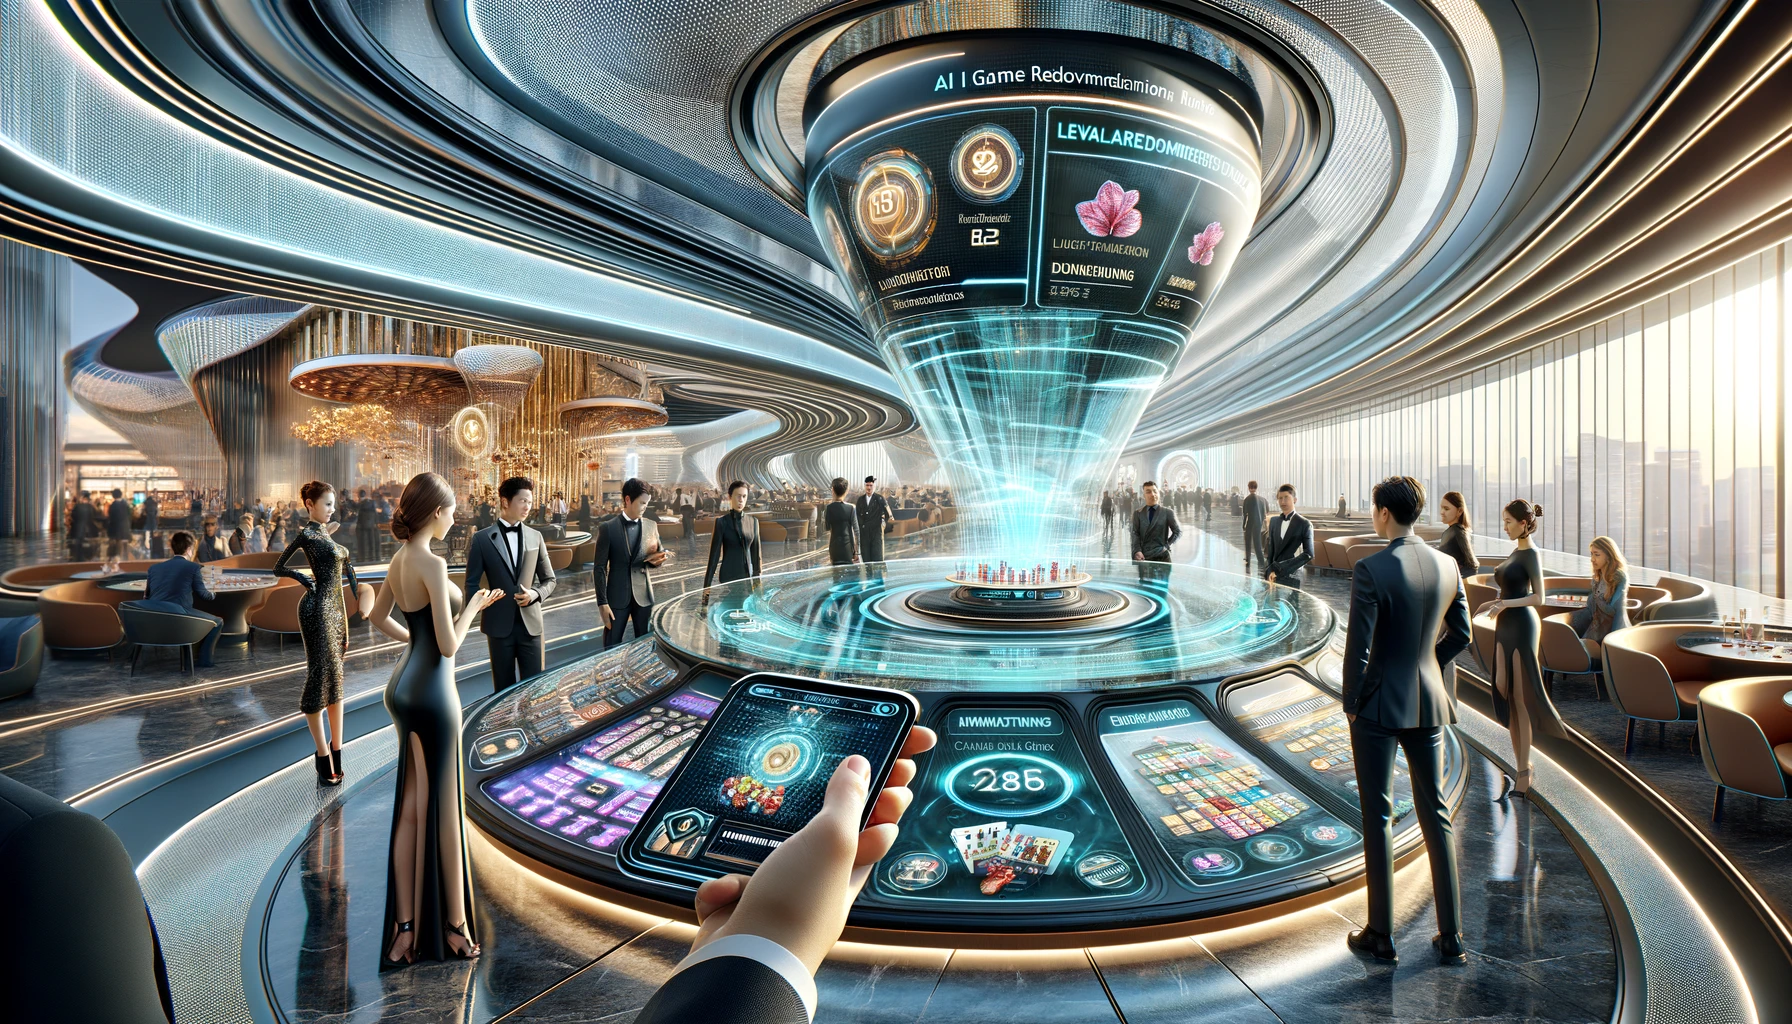 A futuristic casino floor with sleek architecture and holographic displays on the left, and a hand holding an AI-powered device with personalized recommendations on the right.